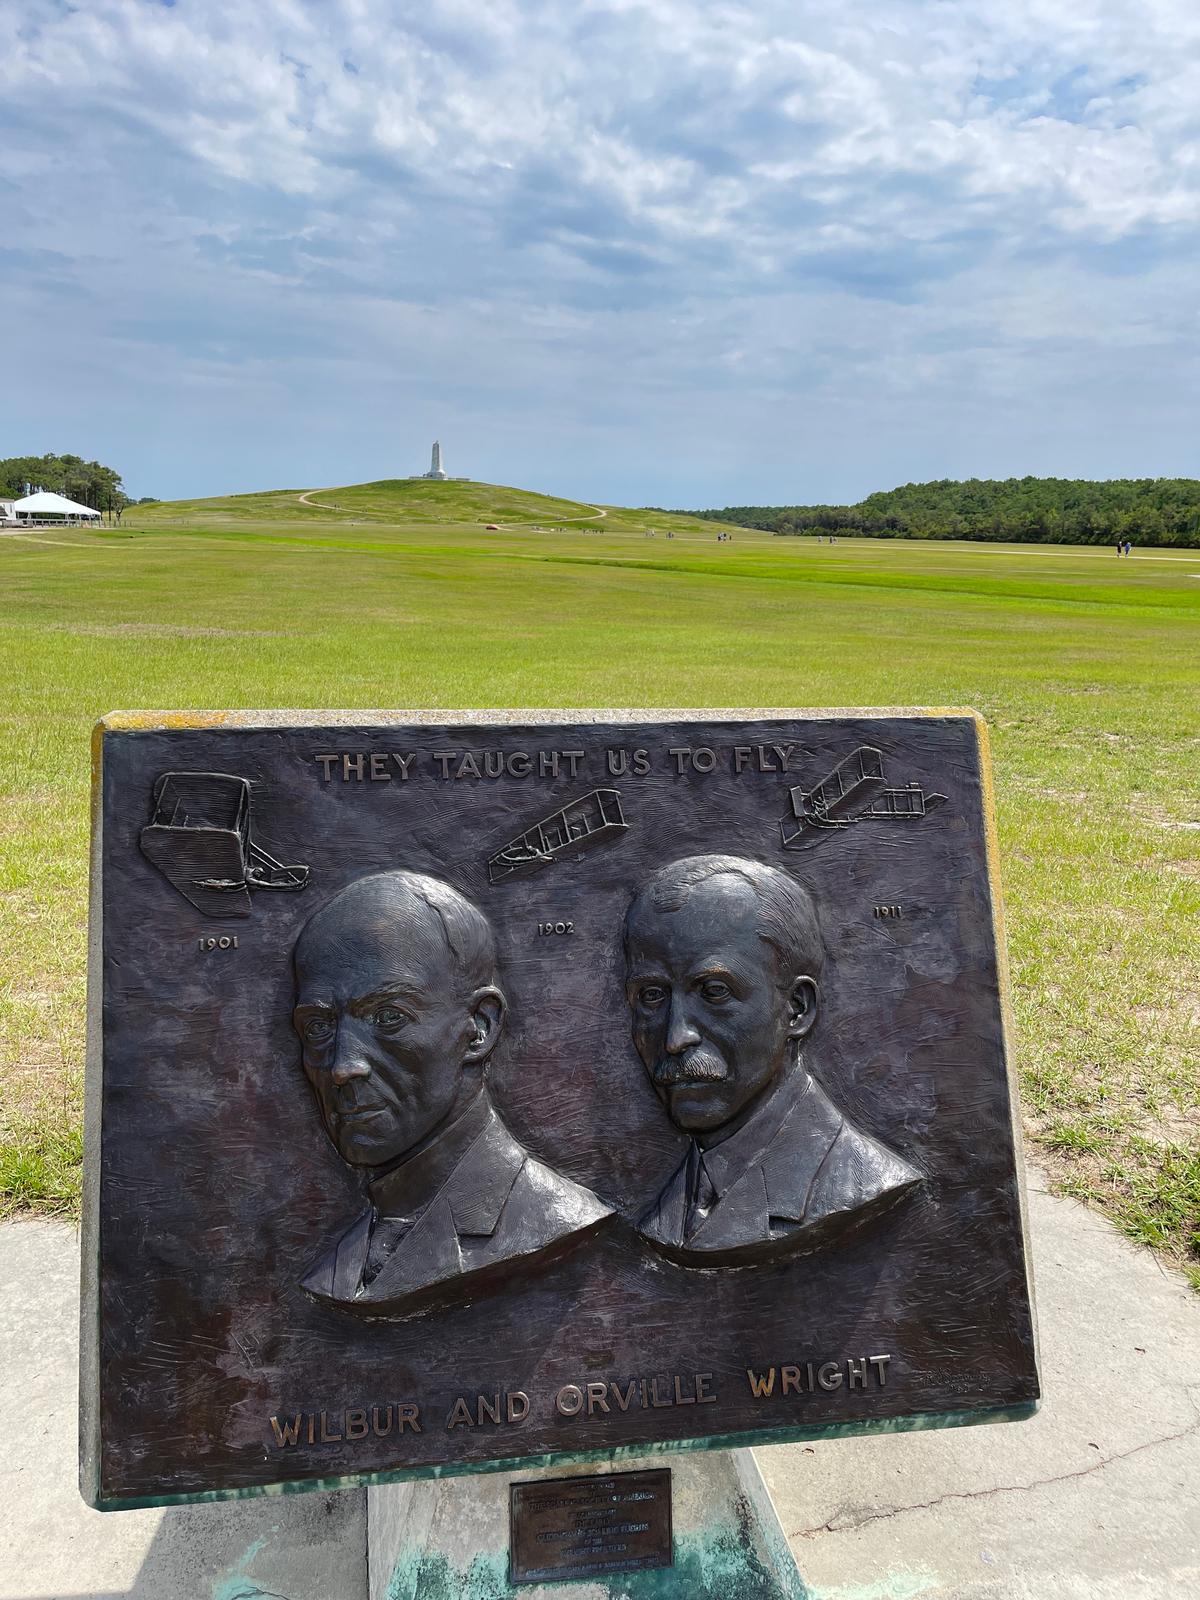 Wilbur and Orville Wright are credited with making the first successful flight, which took place from the sand dune in the background where the memorial now stands. (Lynn Topel)